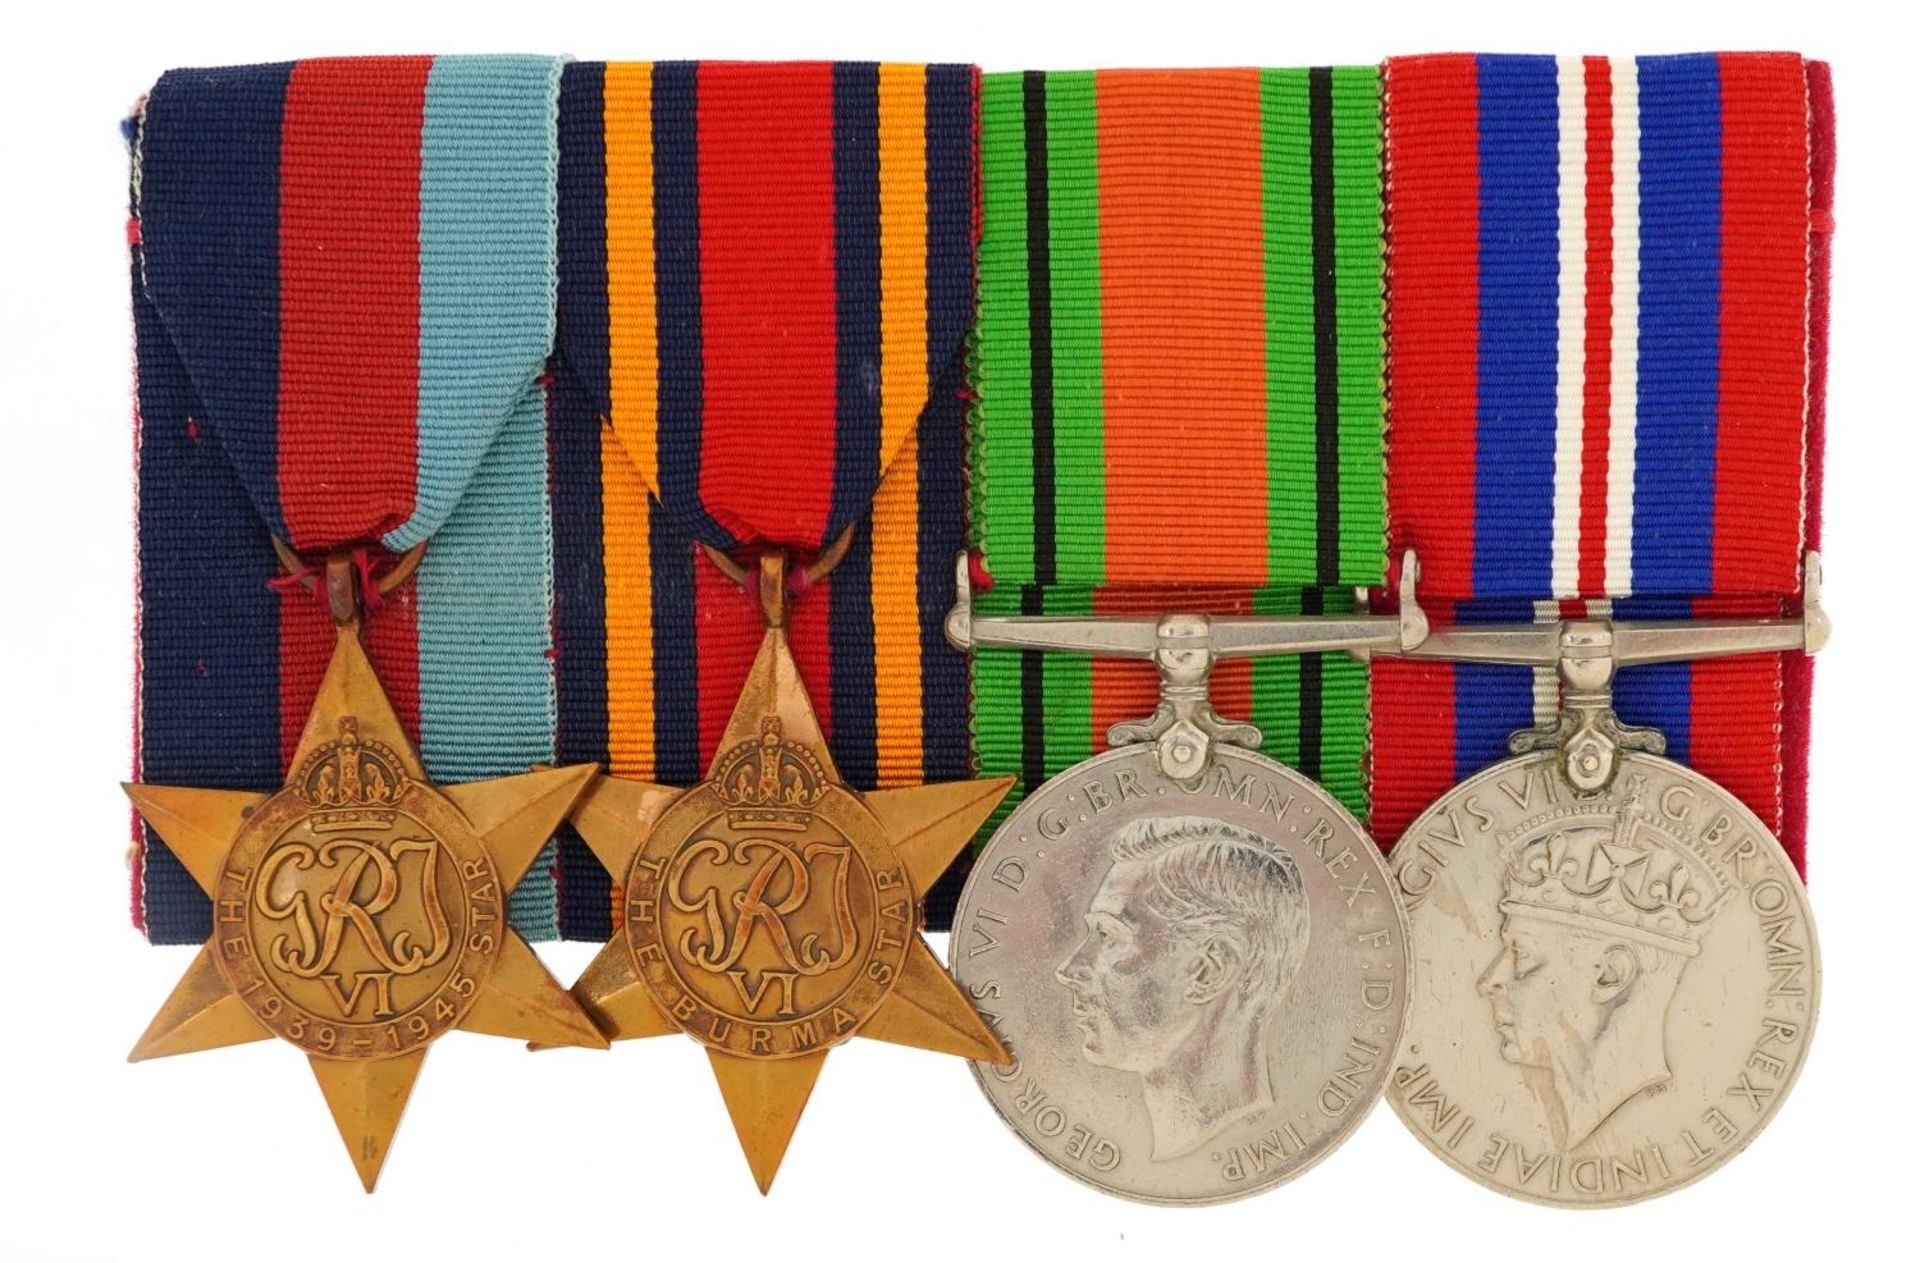 British military World War II four medal group including two stars : For further information on this